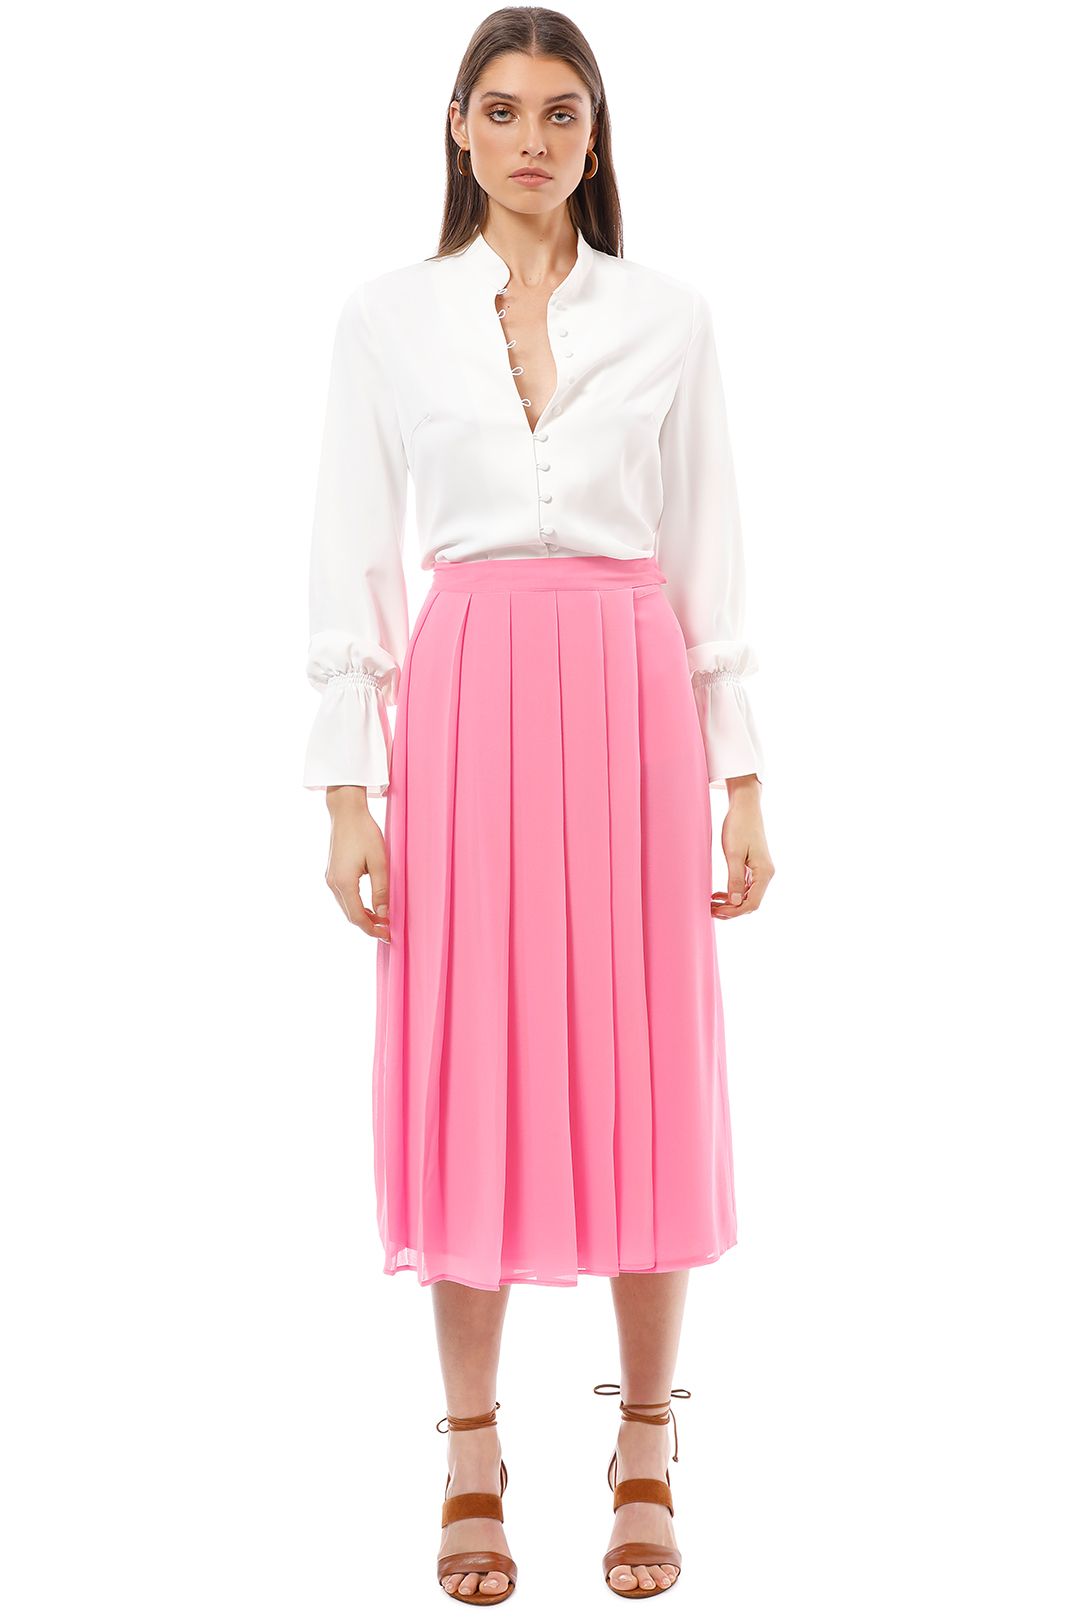 Closet London - Pleated Skirt - Pink - Front